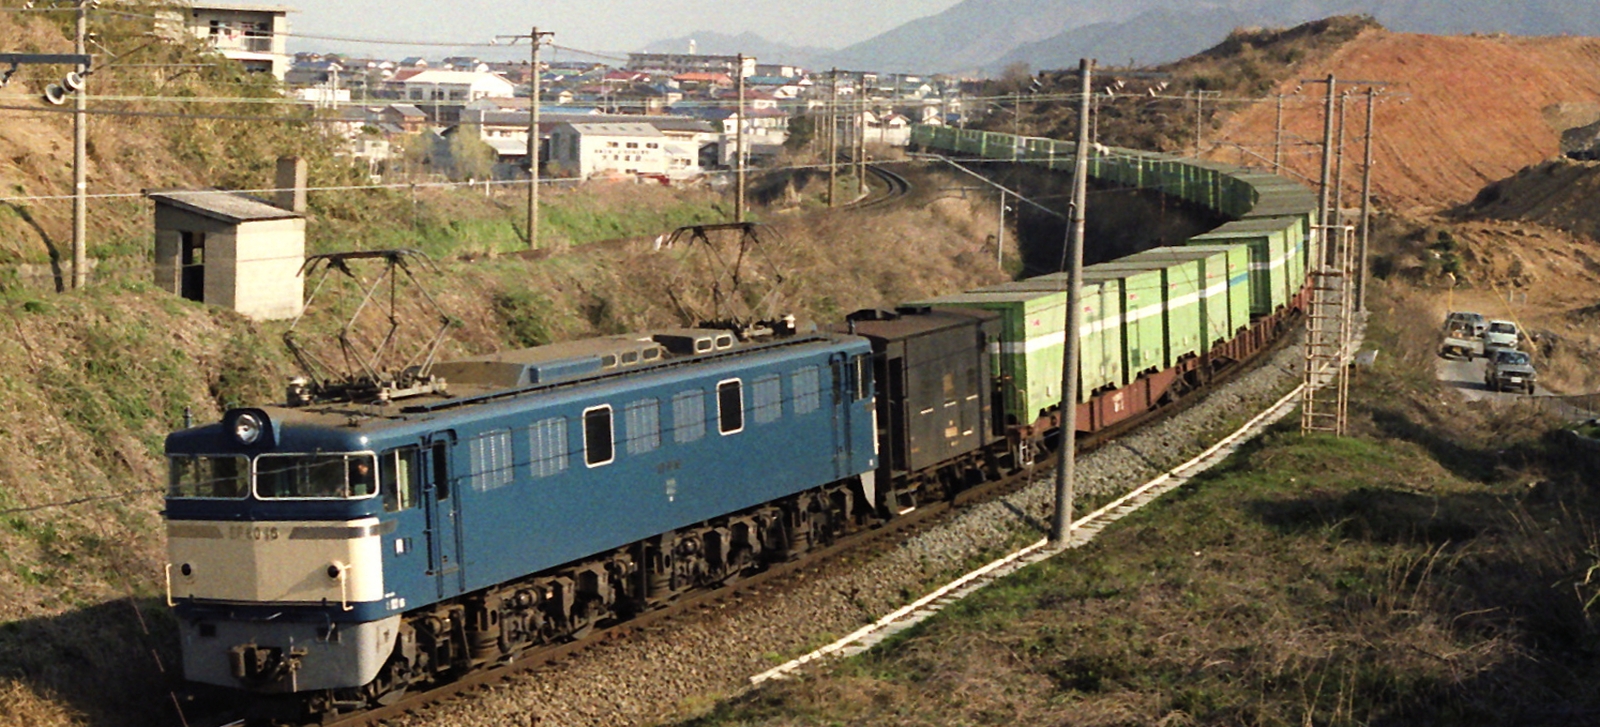 An EF60 in the year 1978 in front of a freight train